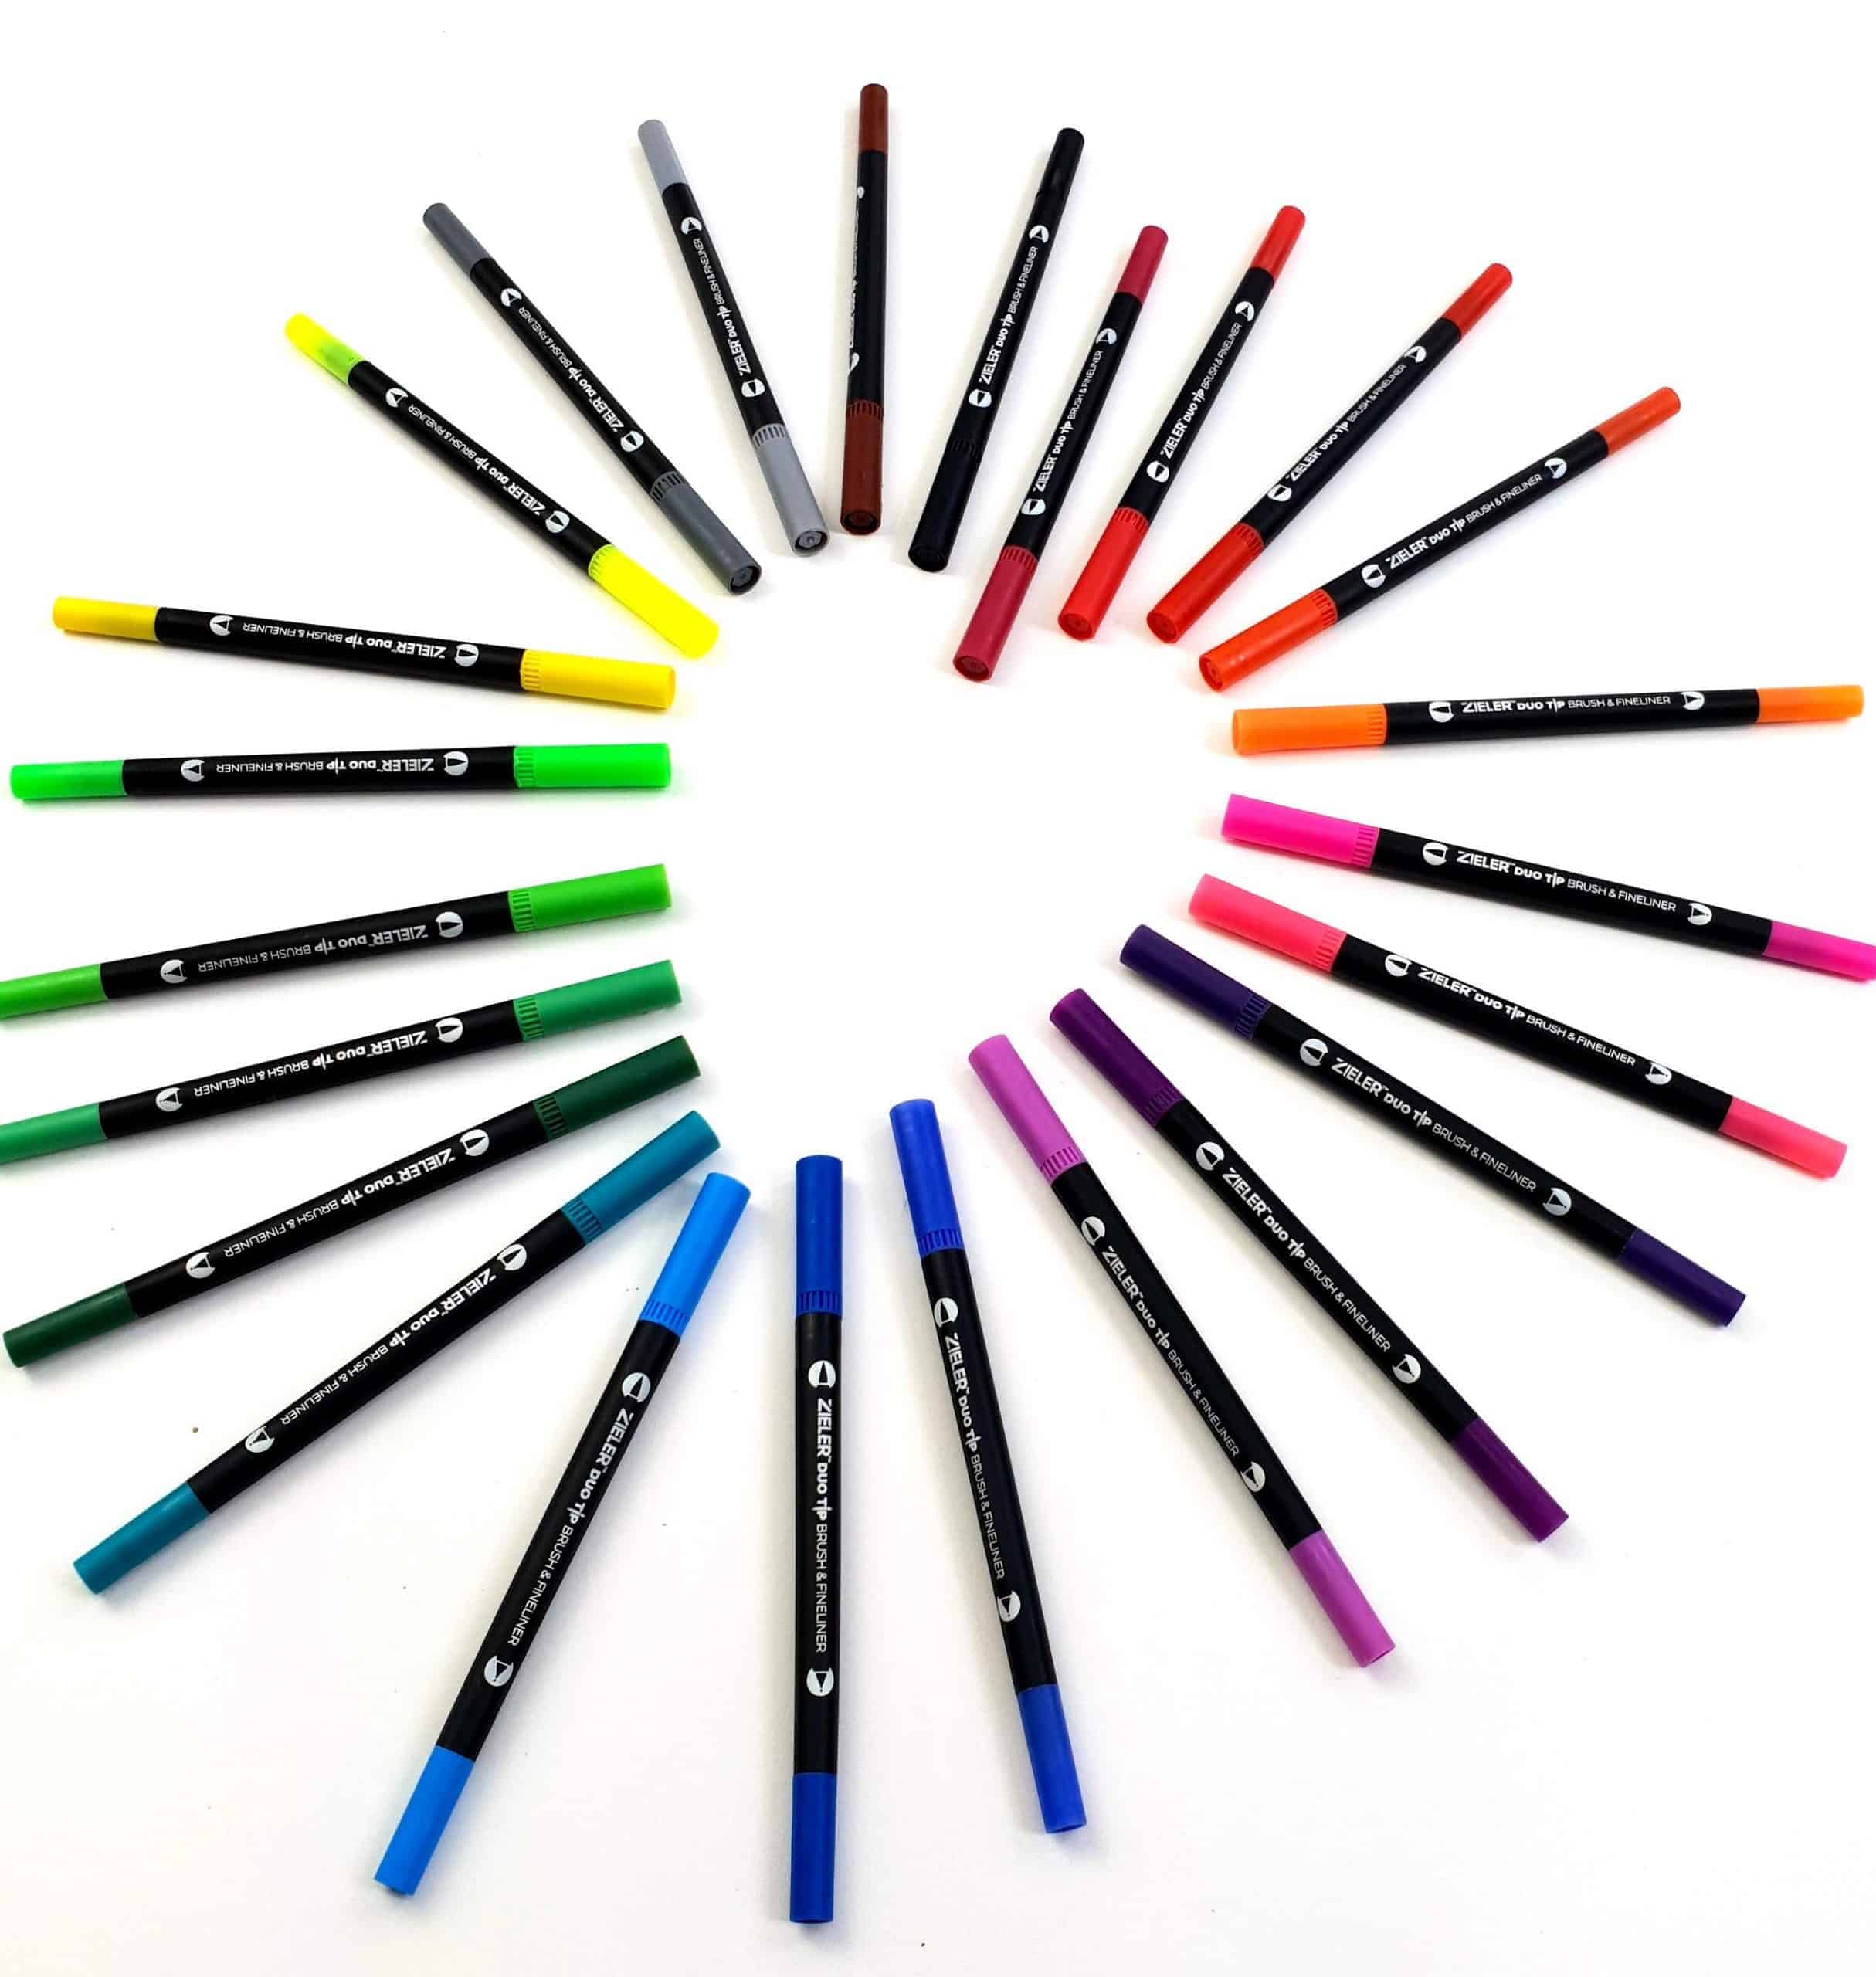 Real Brush Pens, 24 Colors for Watercolor Painting,Paint Markers for  Coloring Art Marker Pen(Brush and Fineliner),Calligraphy and Drawing with  Water Brush for Artists and Beginner Painters 